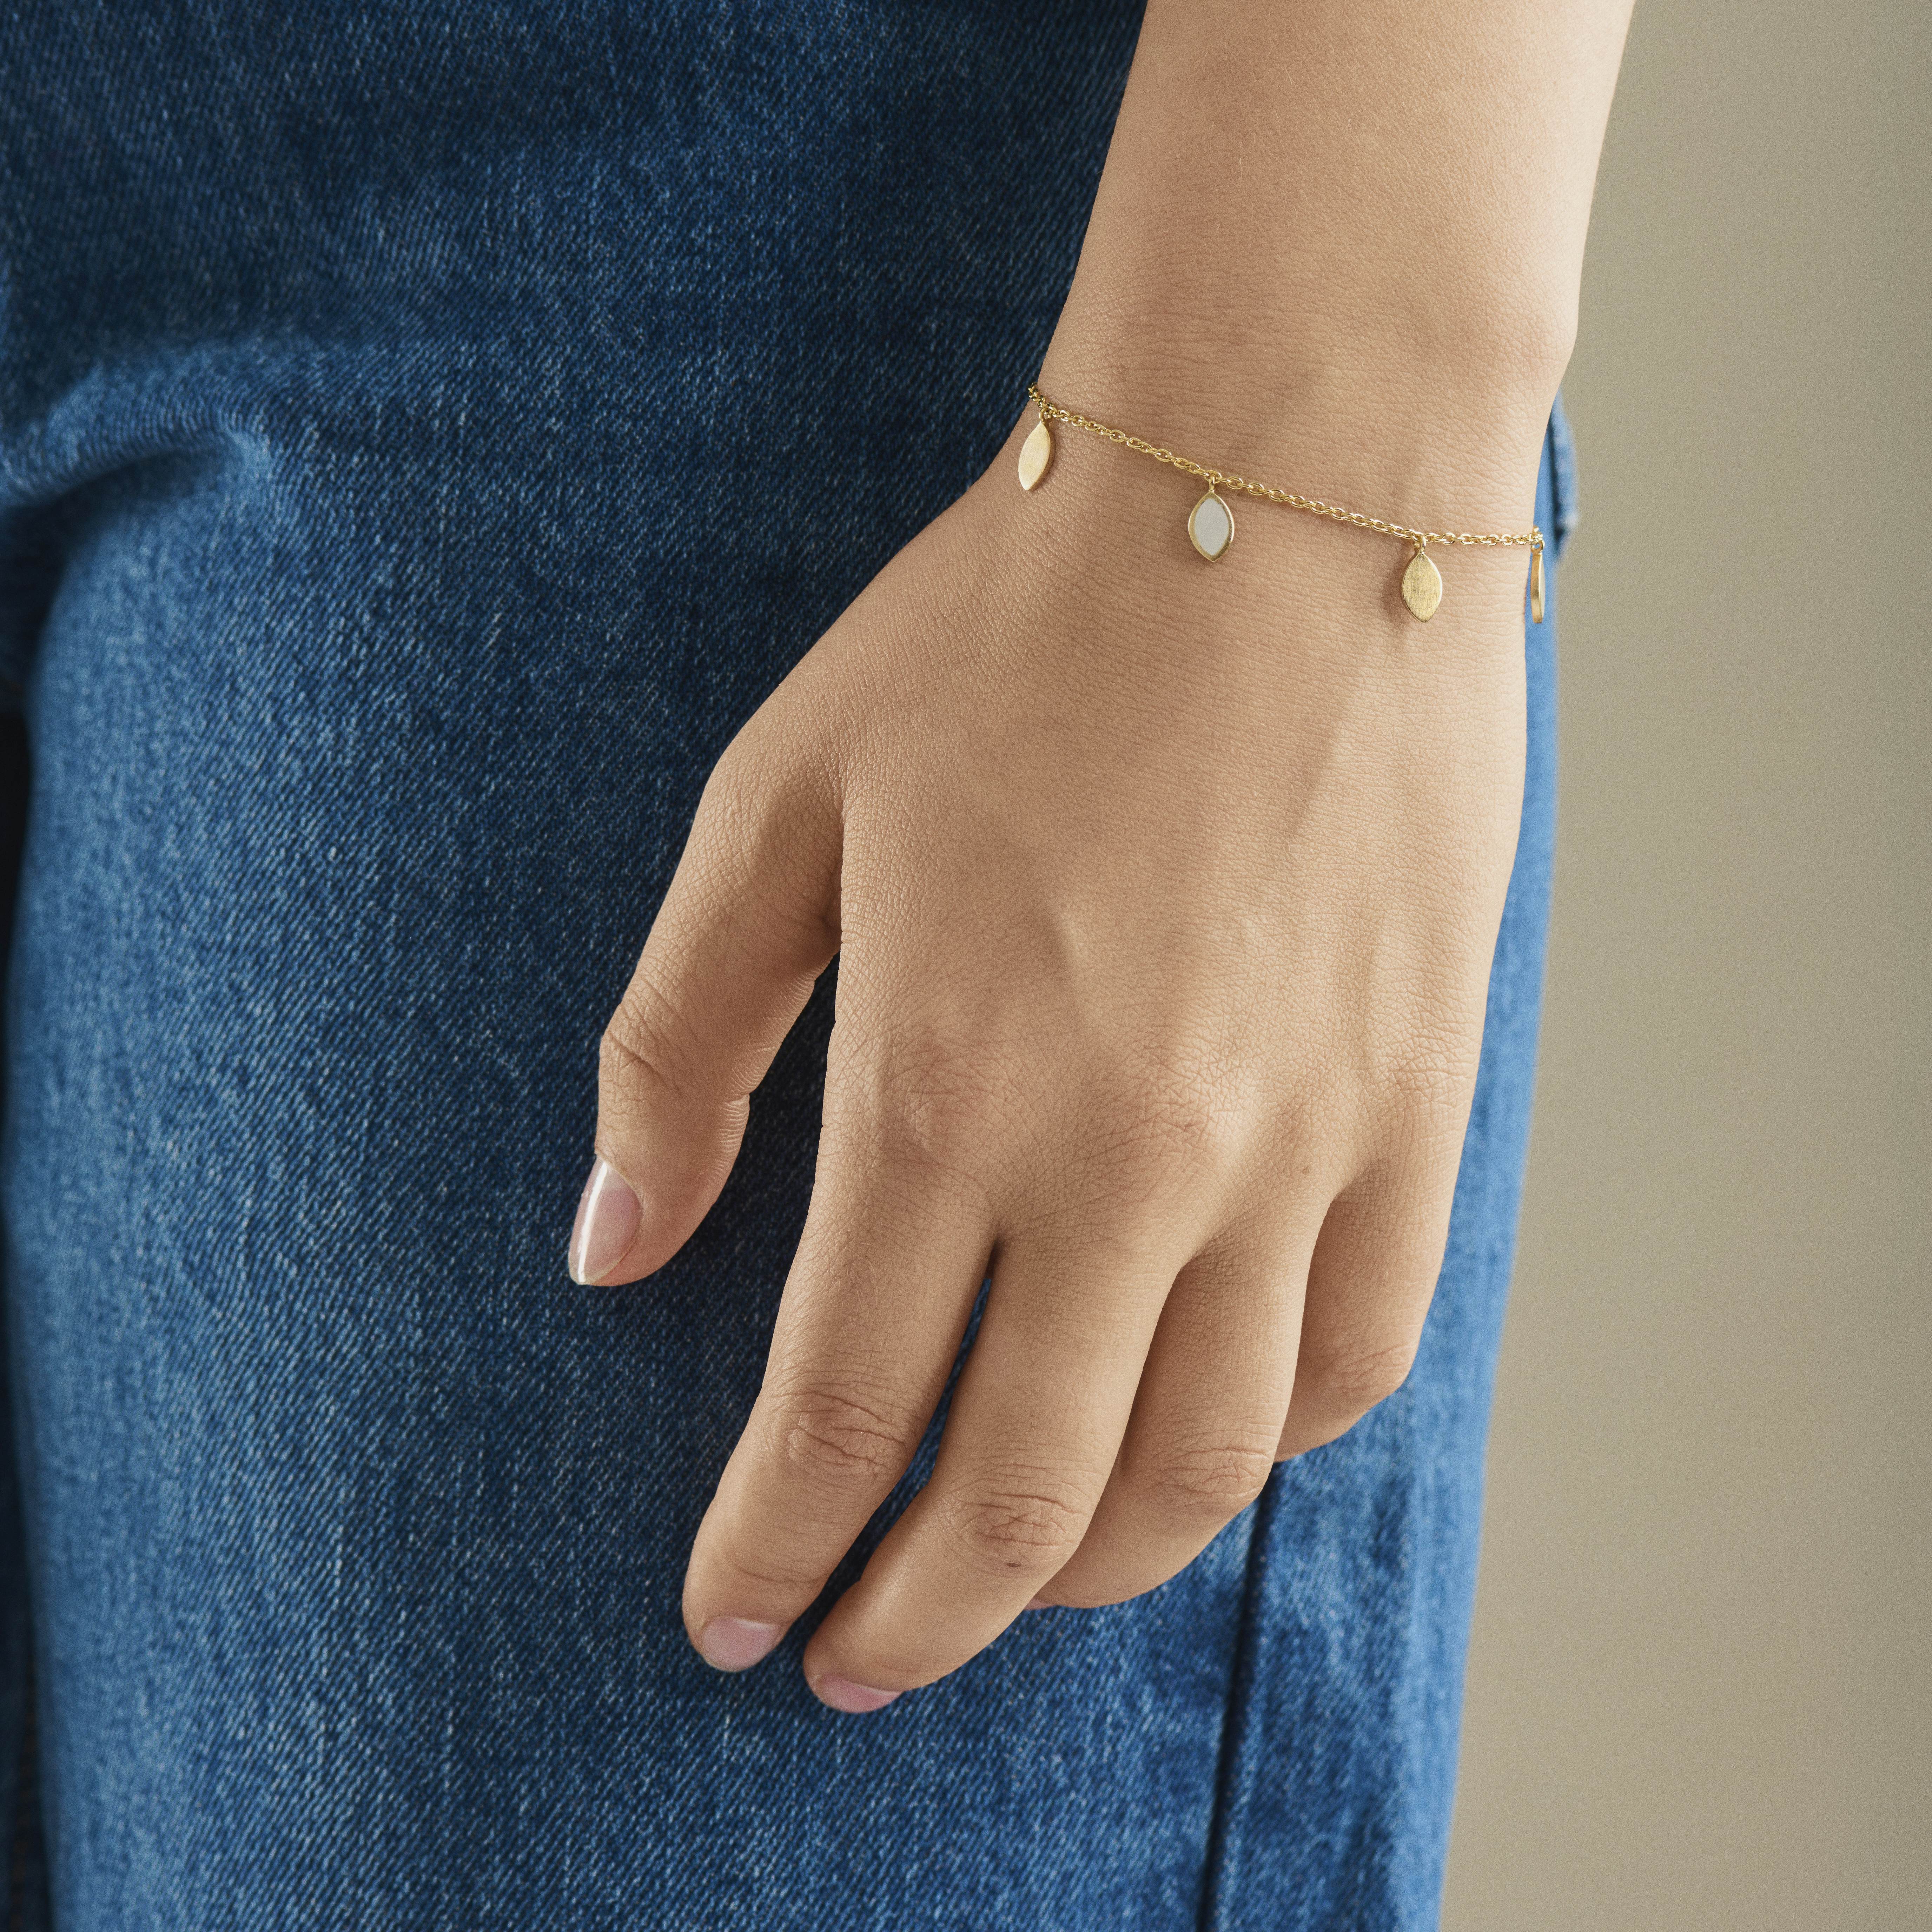 Flake Bracelet from Pernille Corydon in Goldplated-Silver Sterling 925